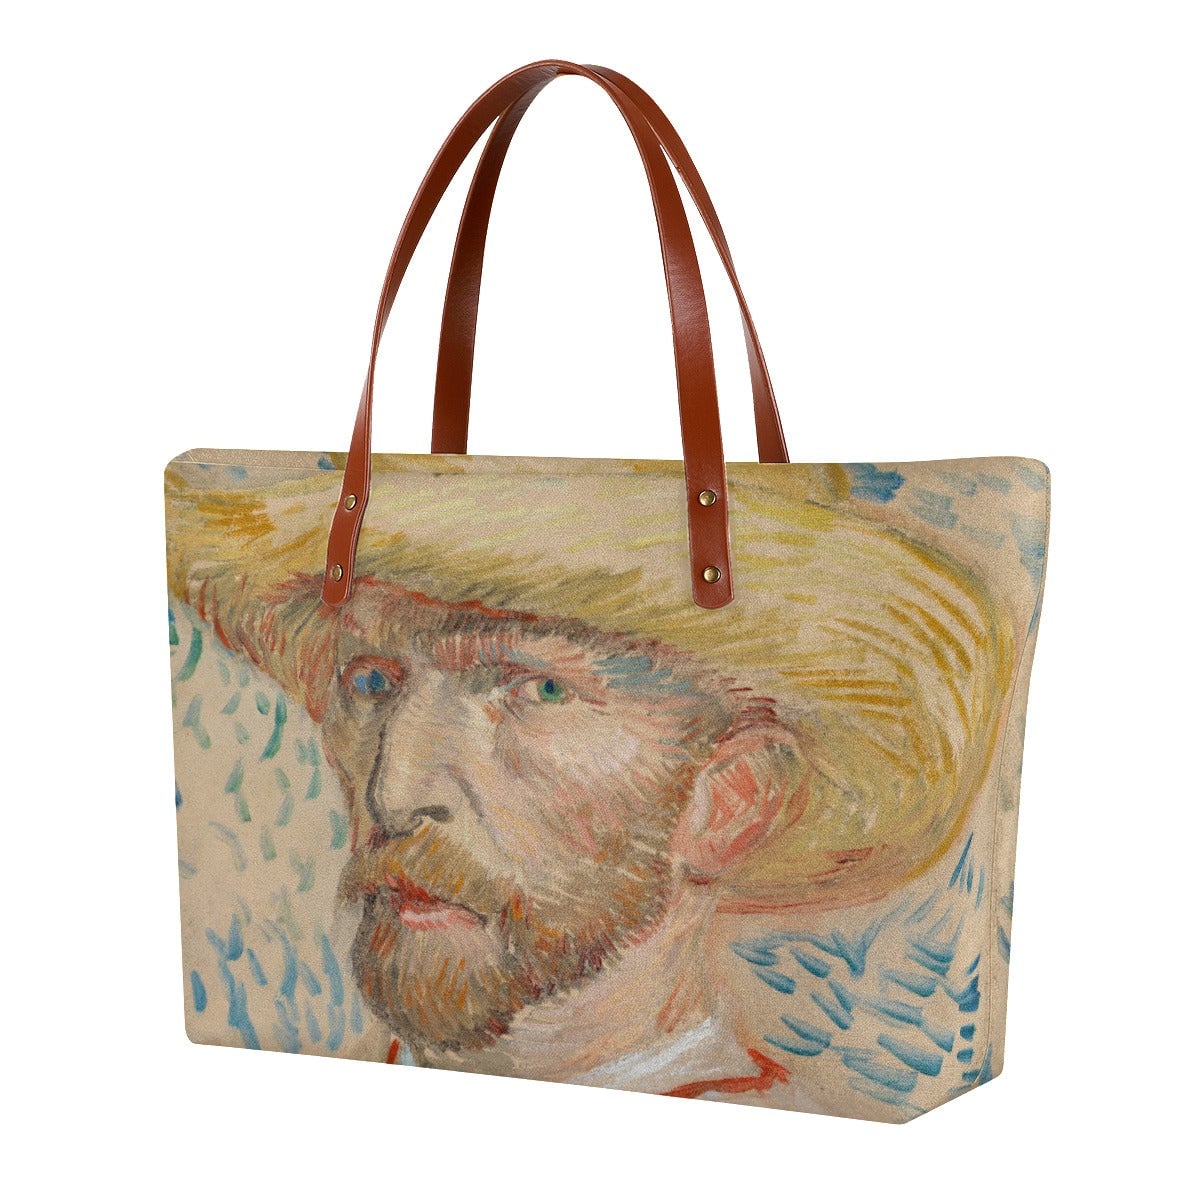 Self-Portrait with a Straw Hat by Vincent van Gogh Tote Bag